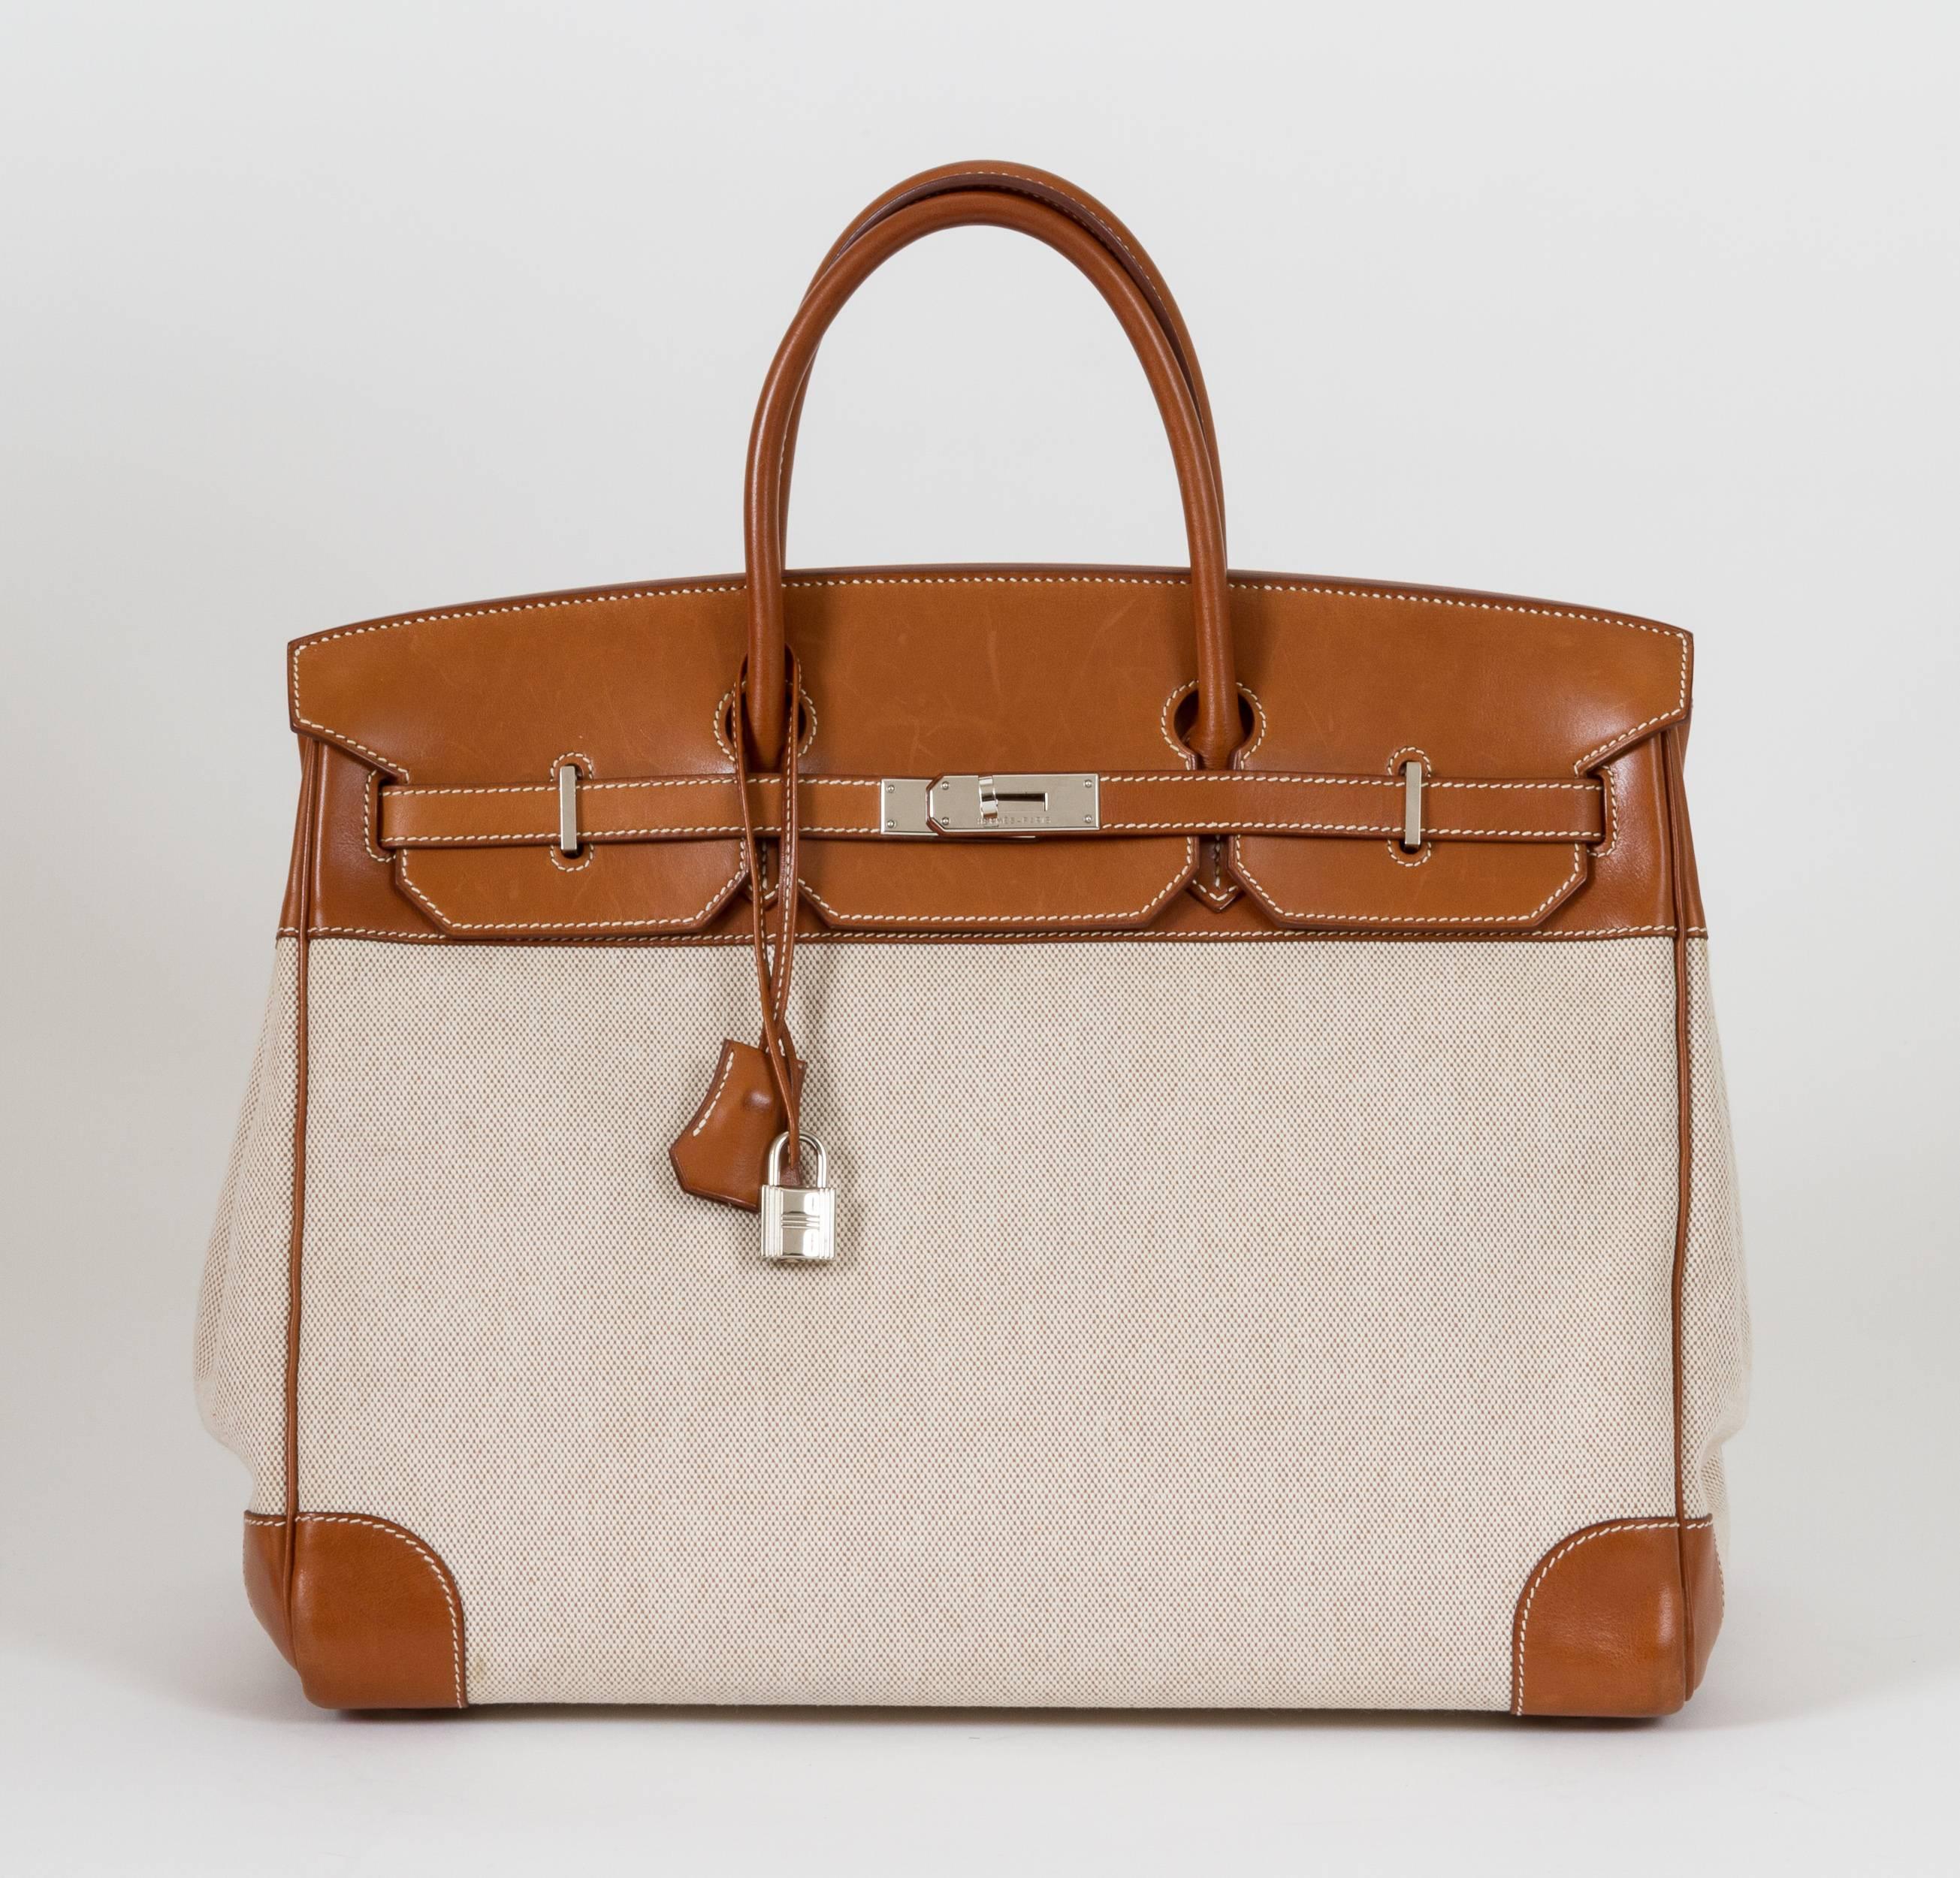 Hermès Birkin 40cm in fauve Barenia leather and beige toile. Barenia is the original leather used by Hermès to build their saddles. Date stamp O for 2011. Handle drop, 5.5